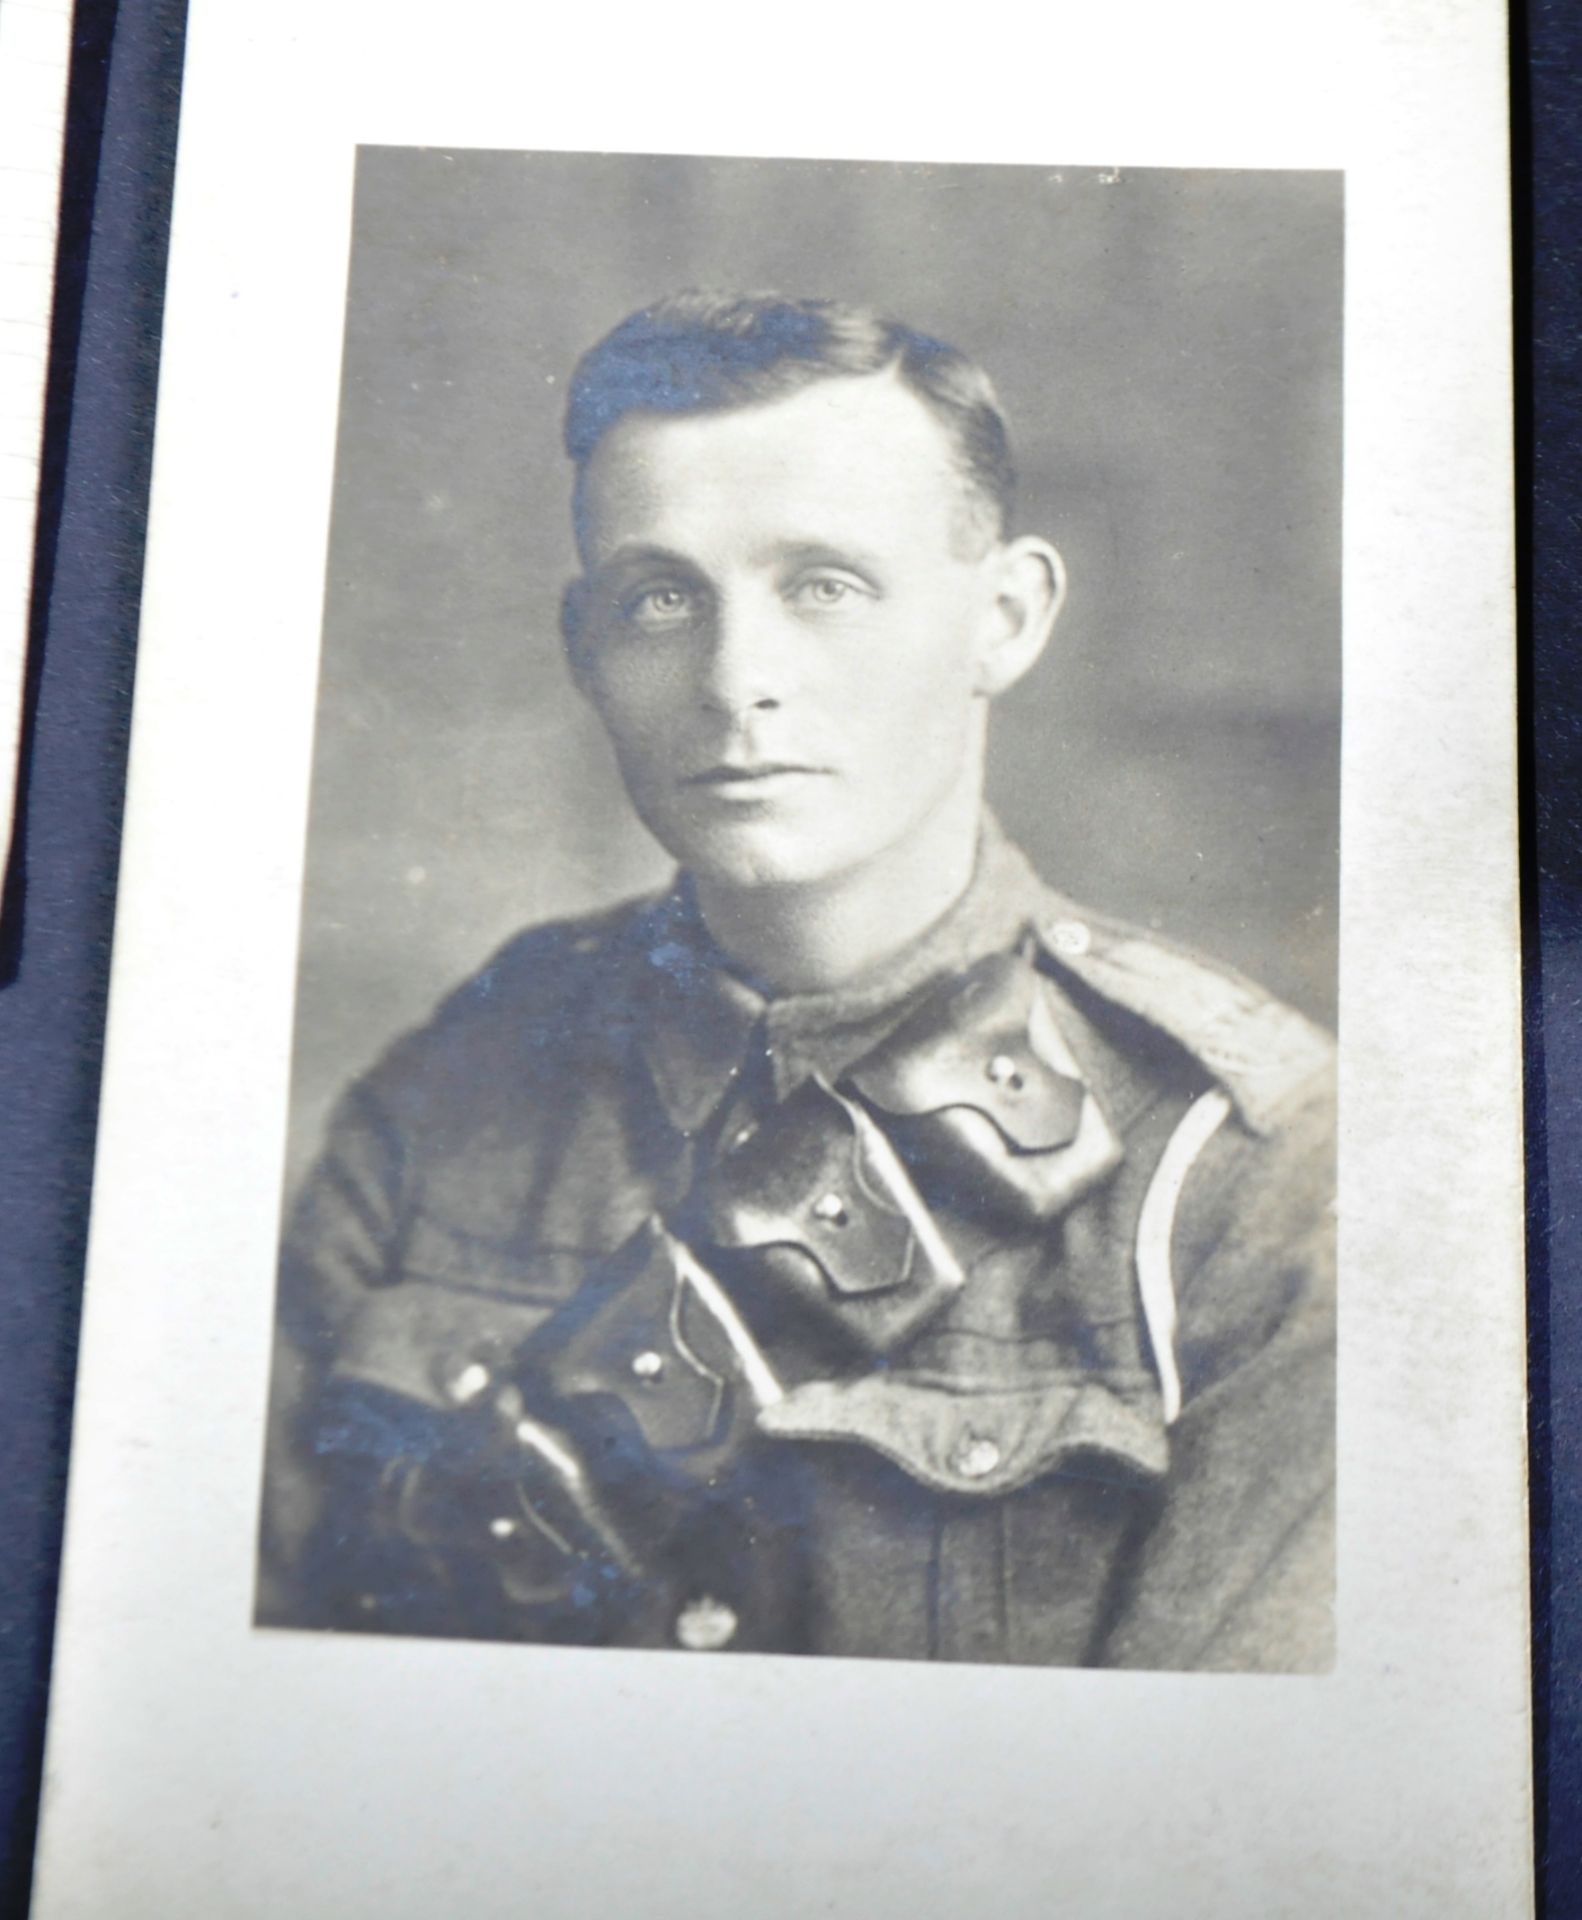 WWI FIRST & WWII SECOND WORLD WAR SOLDIER'S EFFECTS - DEVONSHIRE - Image 3 of 5